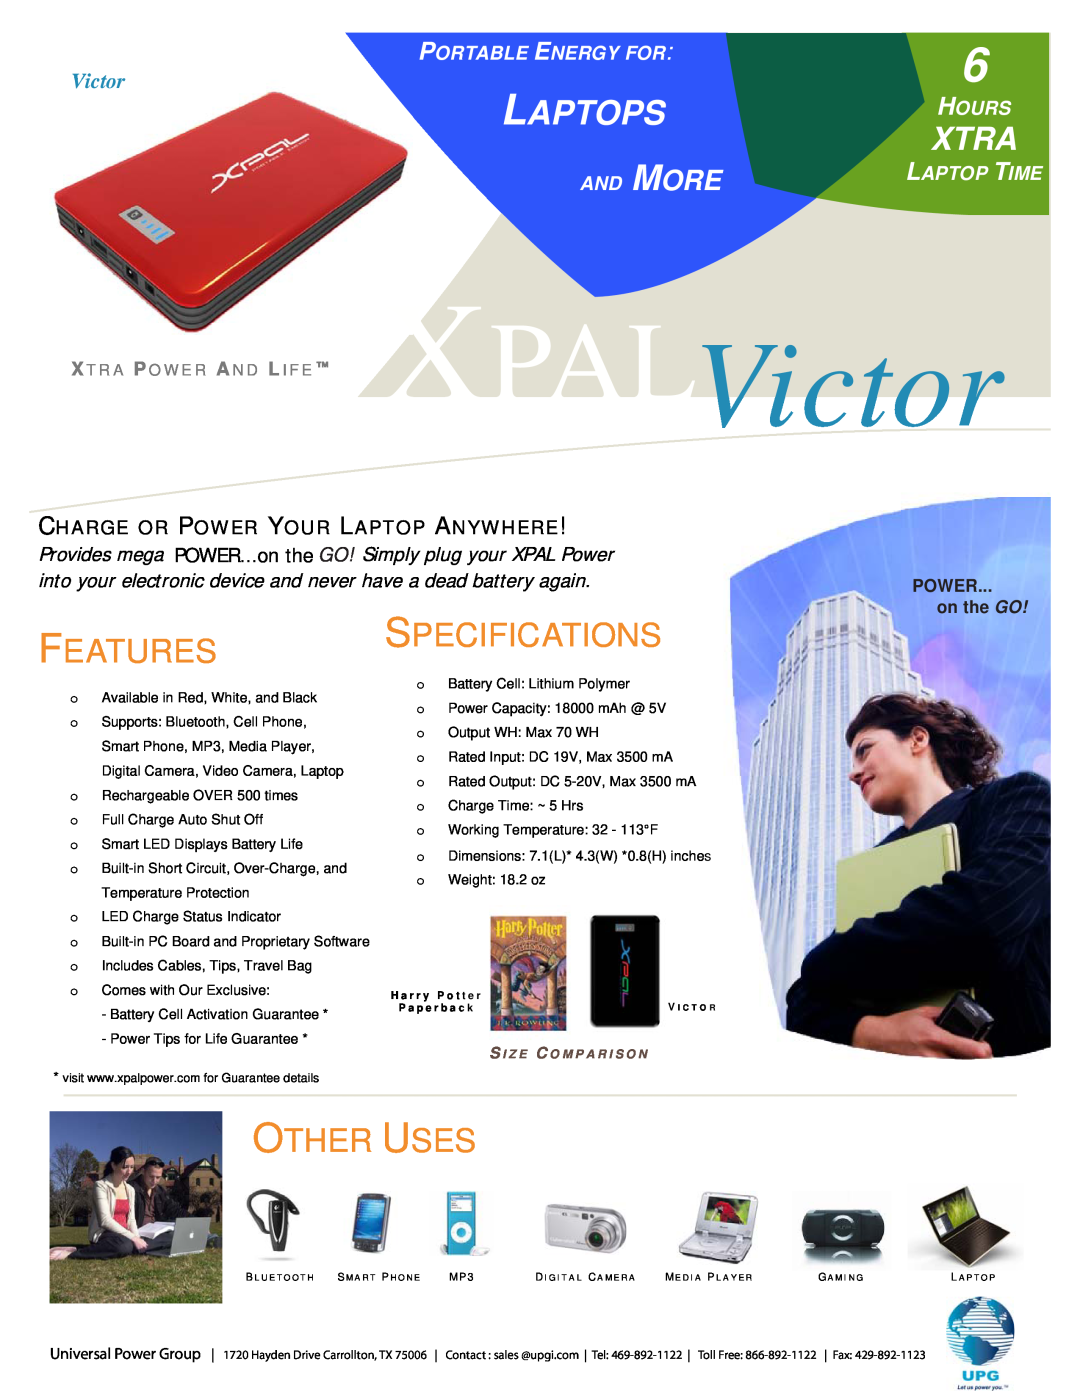 Universal Power Group XPAL Victor specifications Laptops, Features, Specifications, Other Uses, Xtra, Portable Energy For 